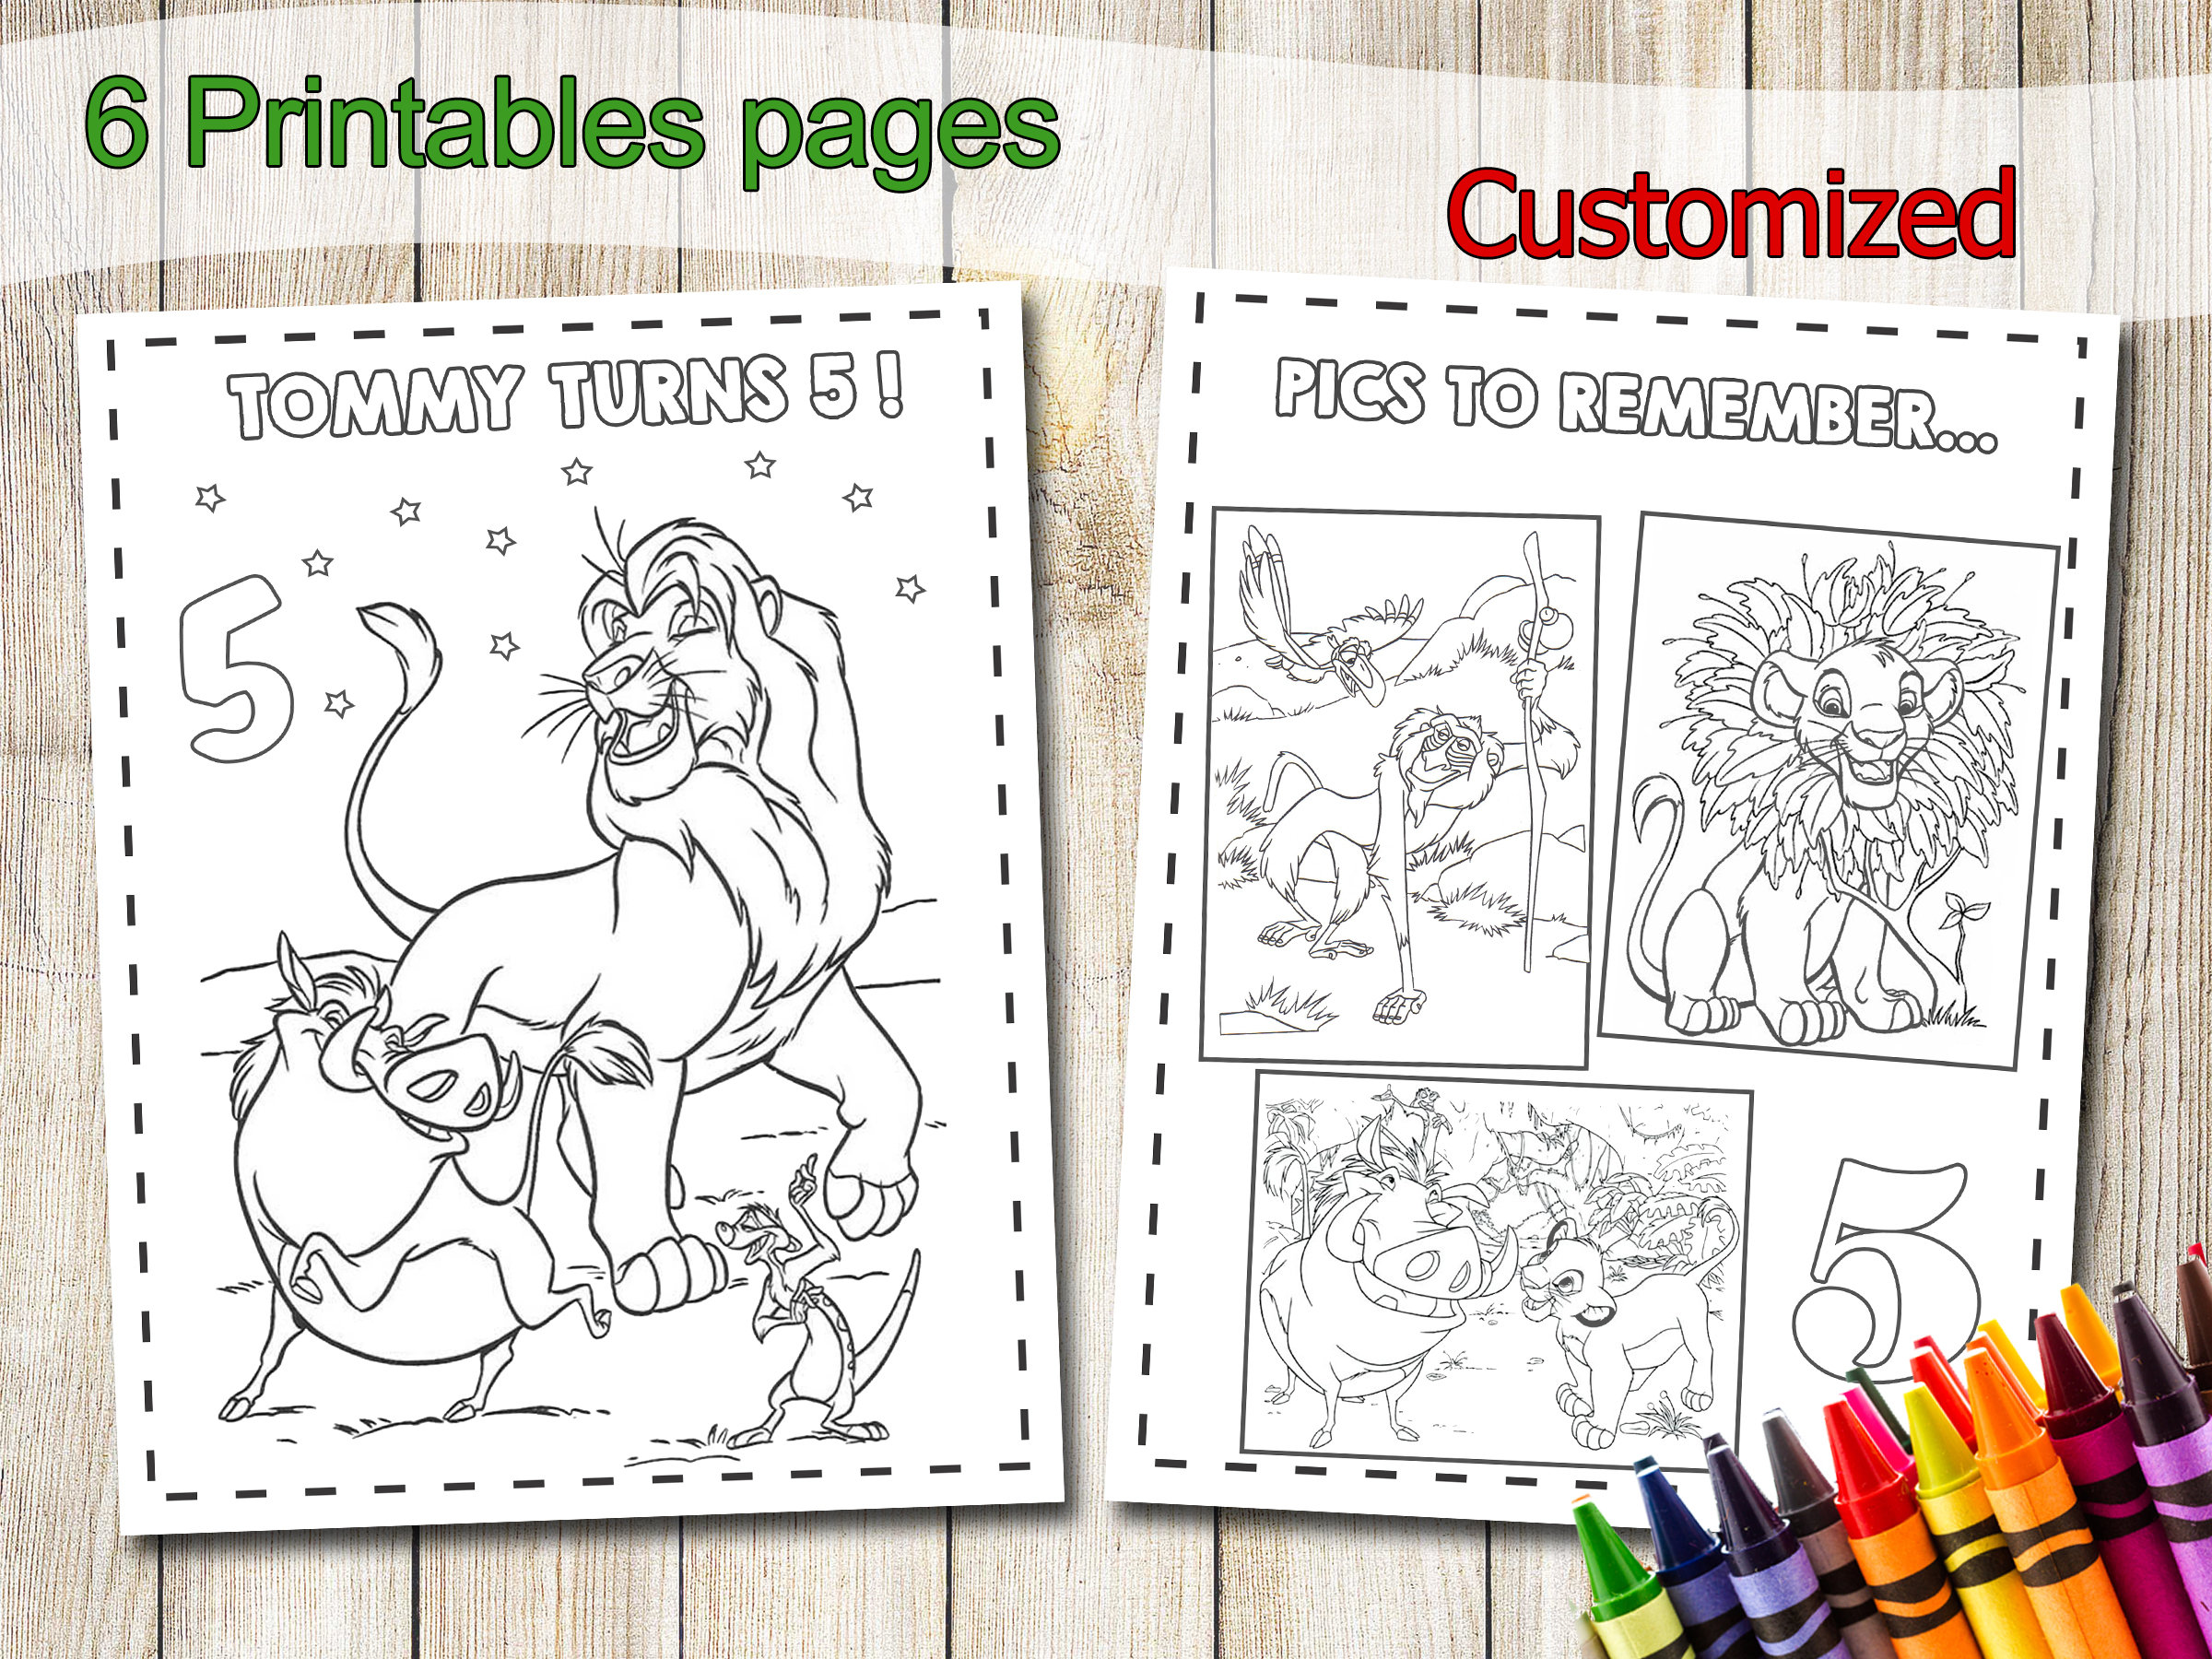 Lion king coloring pages lion king party favors lion king birthday lion king coloring booklion king activities